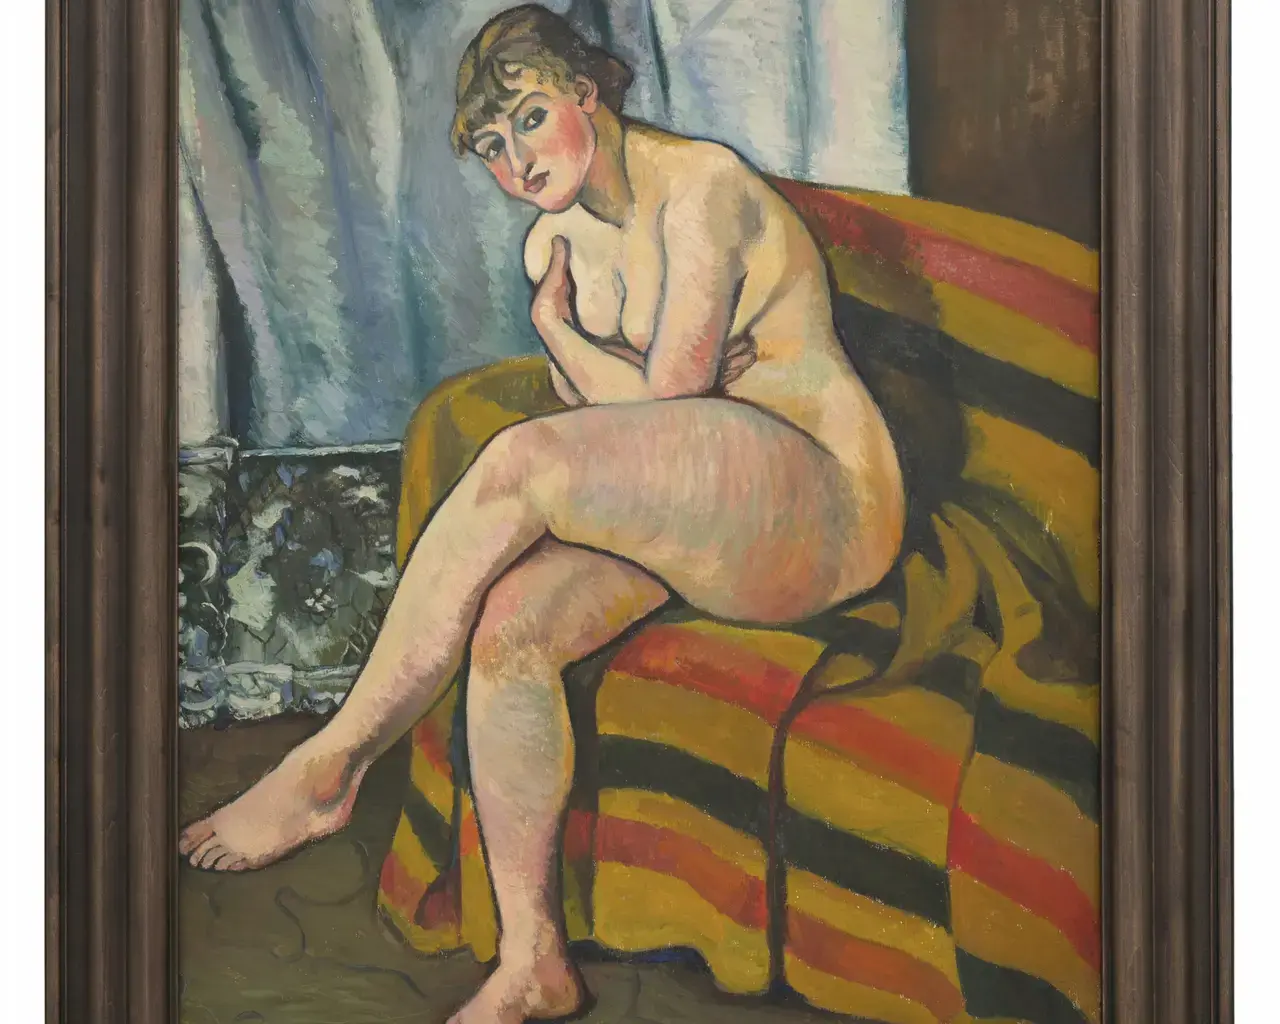 Suzanne Valadon, Nude Sitting on a Sofa, 1916, oil on canvas, 32” x 23”. Courtesy of the Weisman &amp; Michel Collection, © 2021 Artist Rights Society (ARS), New York.